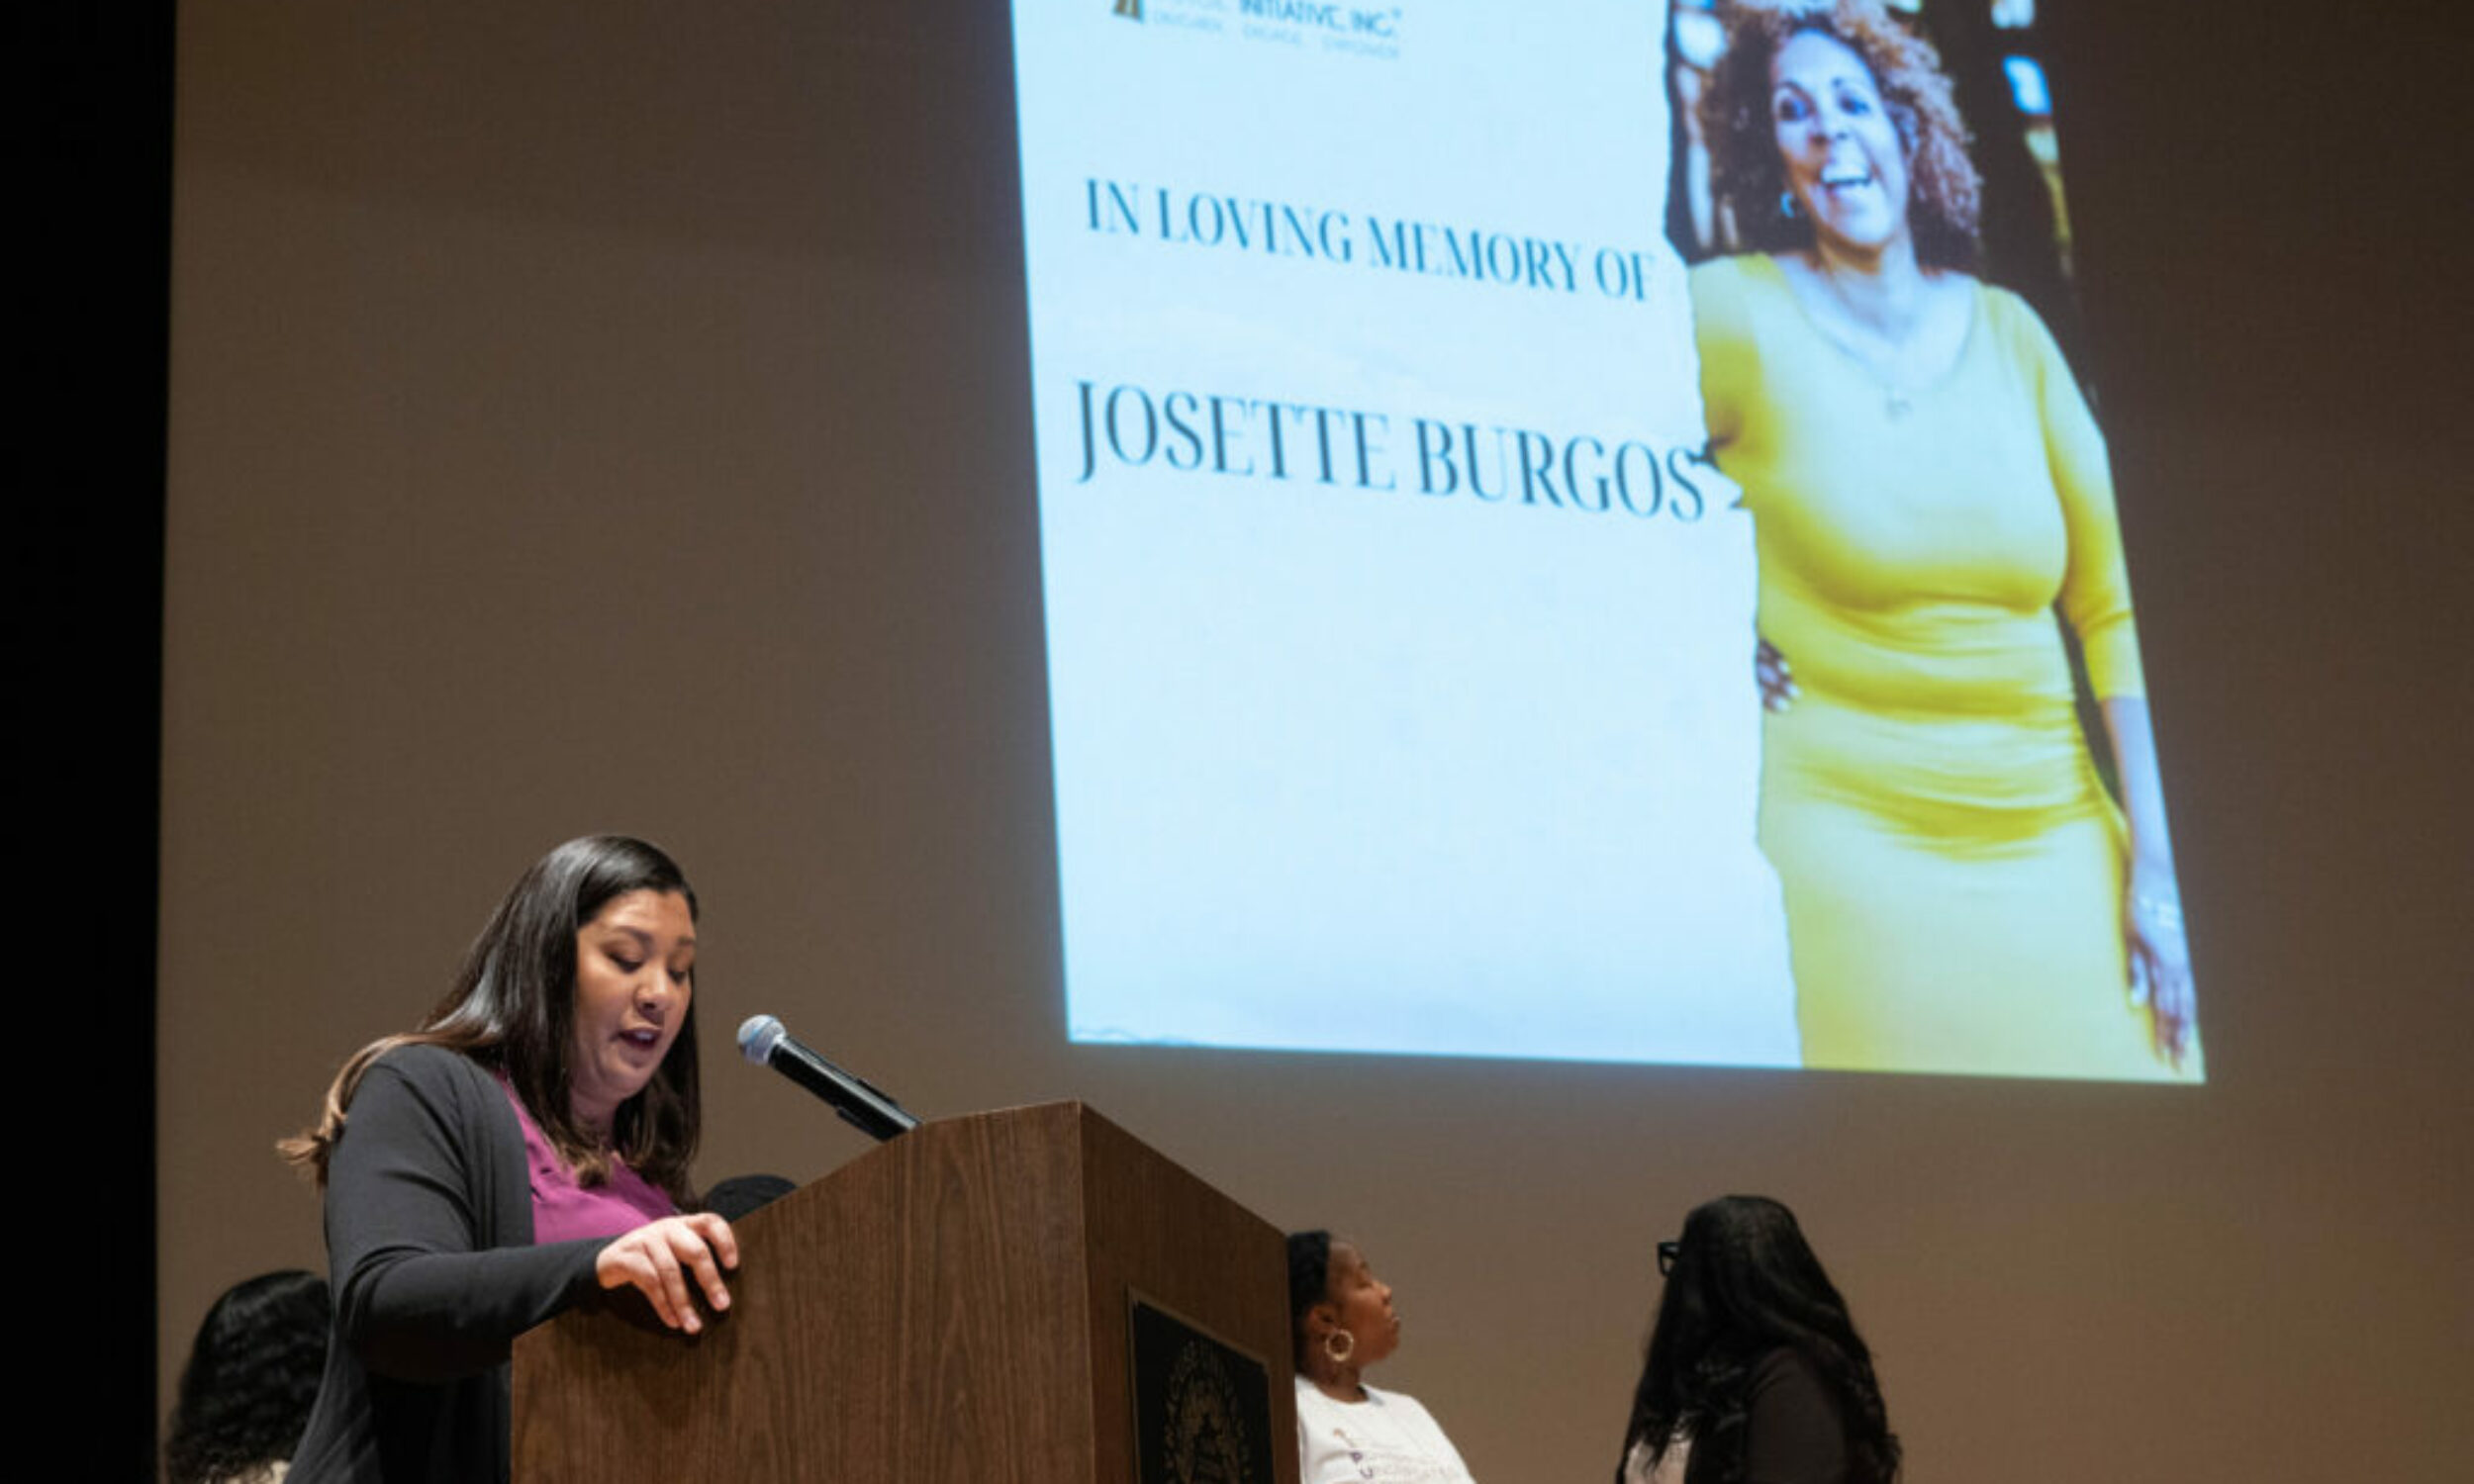 19th Annual Sisters Empowering Sisters conference